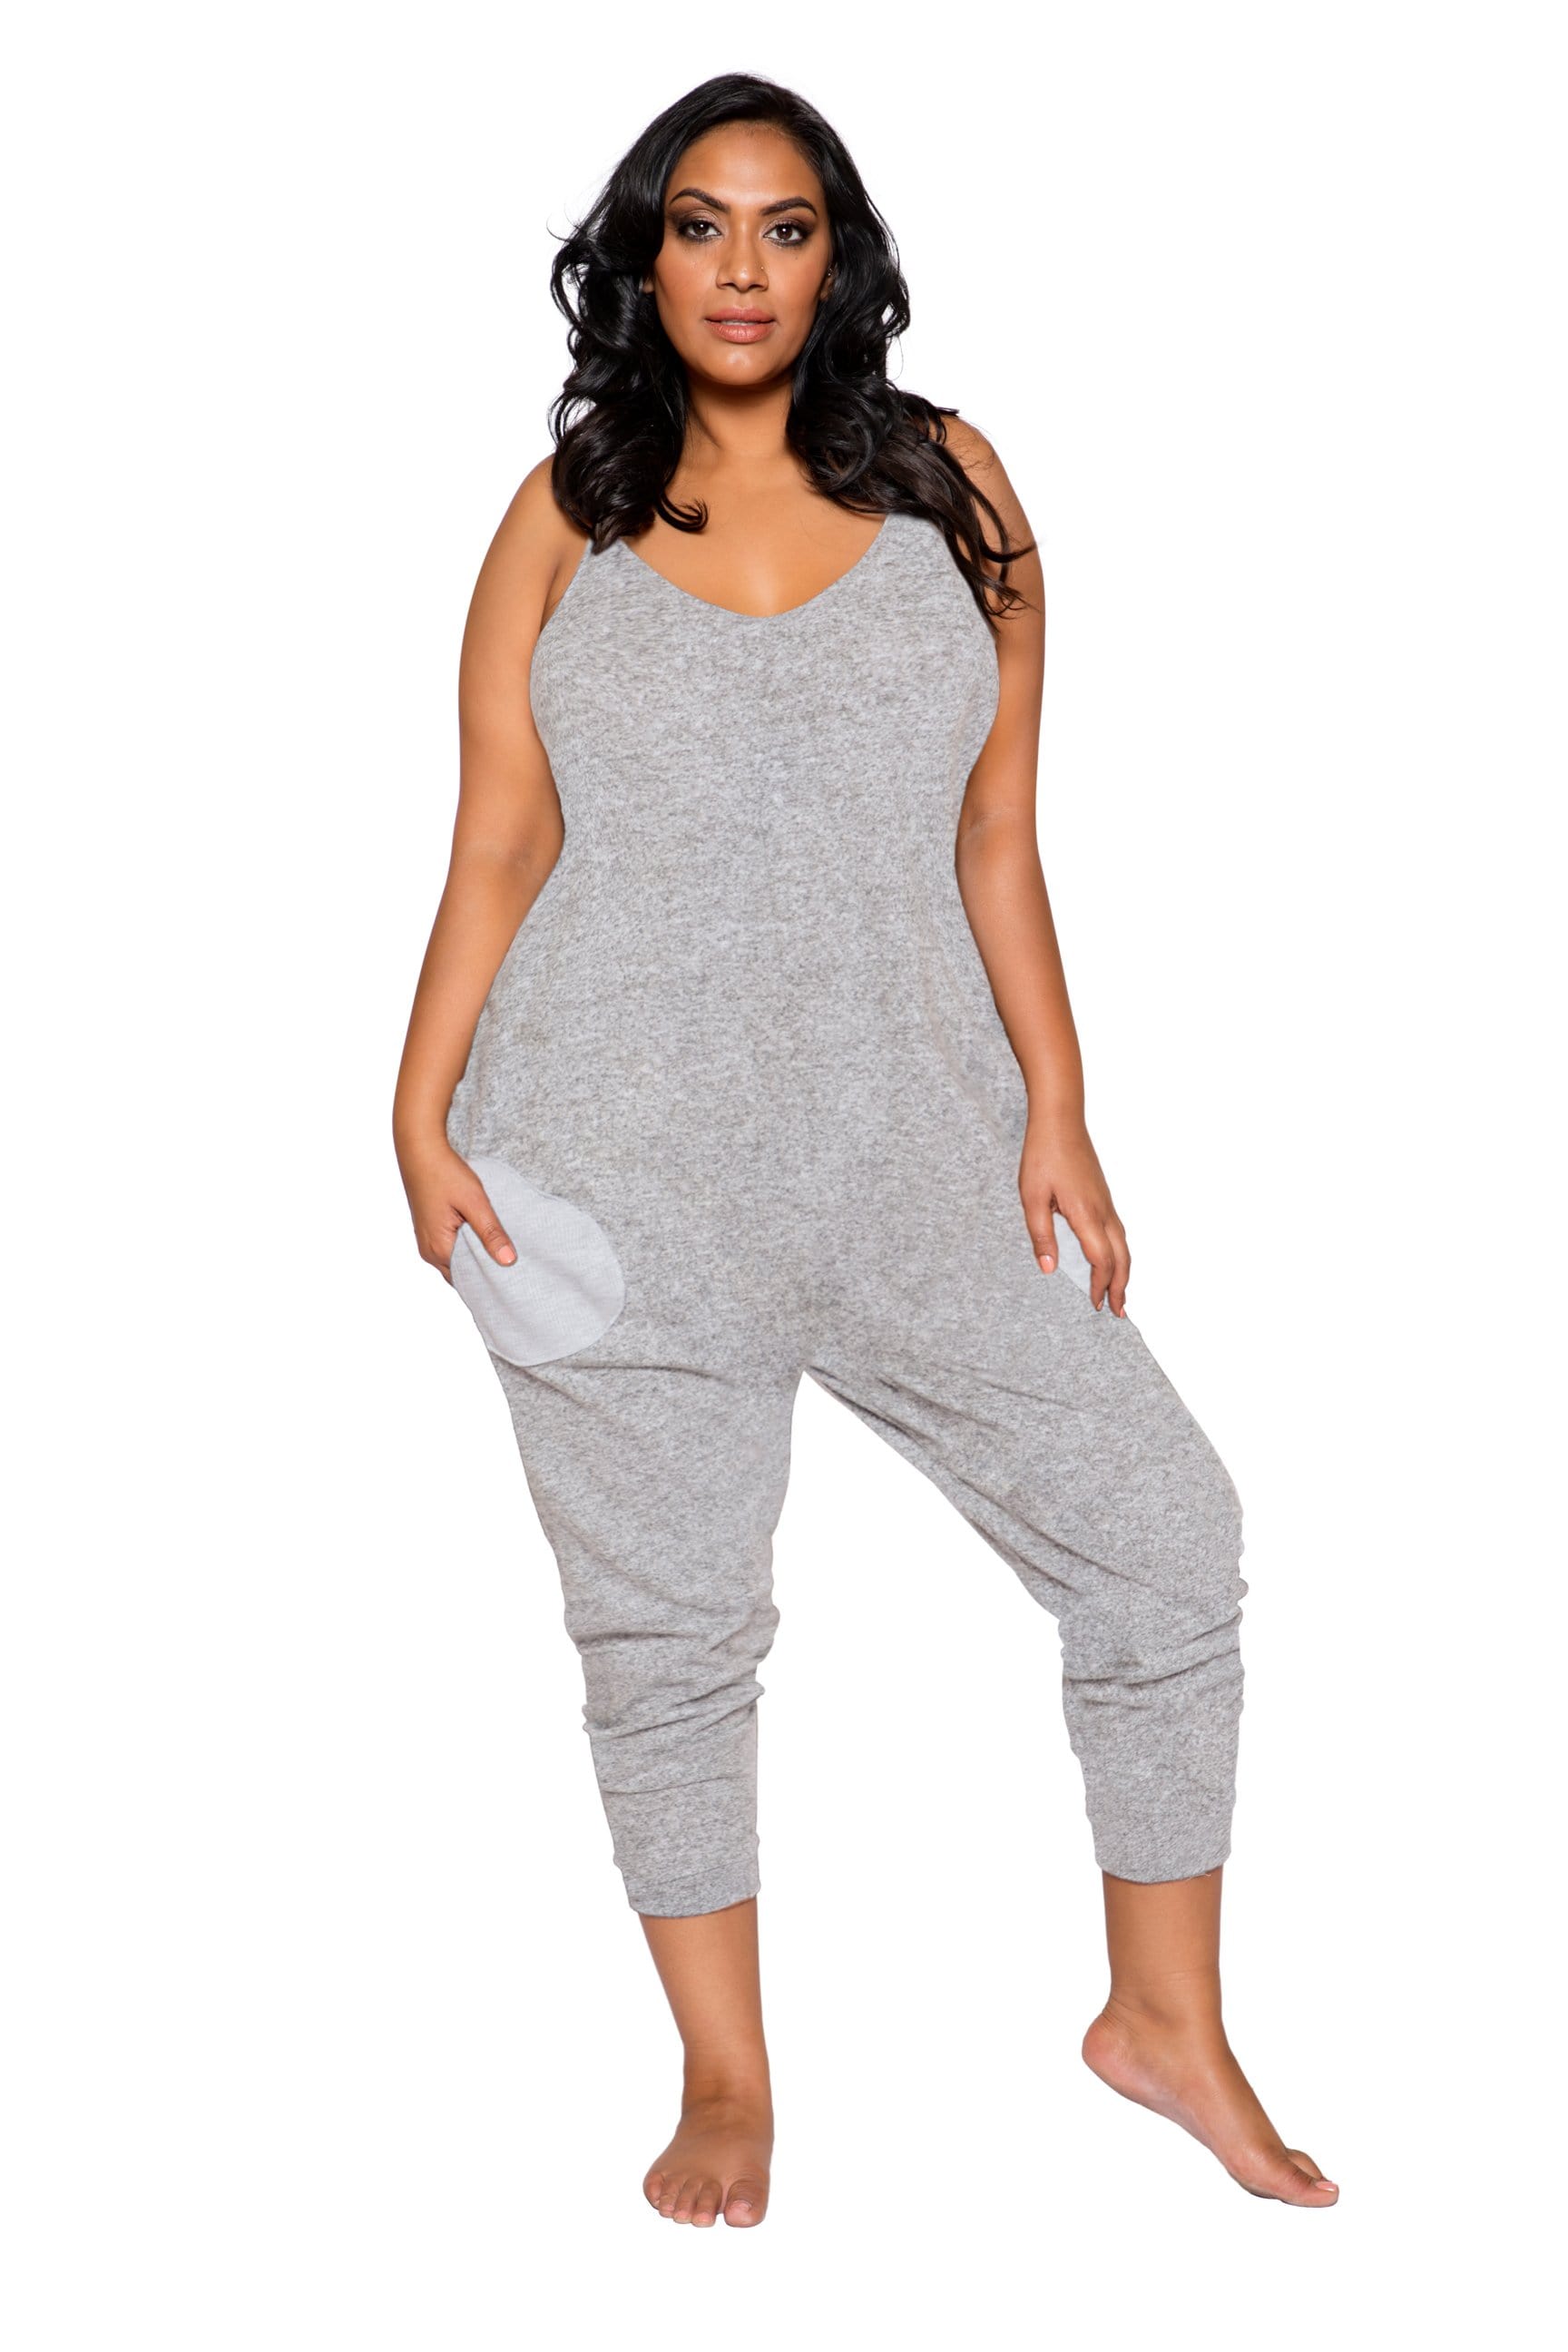 Can Plus-Size Women Wear Jumpsuits? In Short, Yes. | Dia & Co